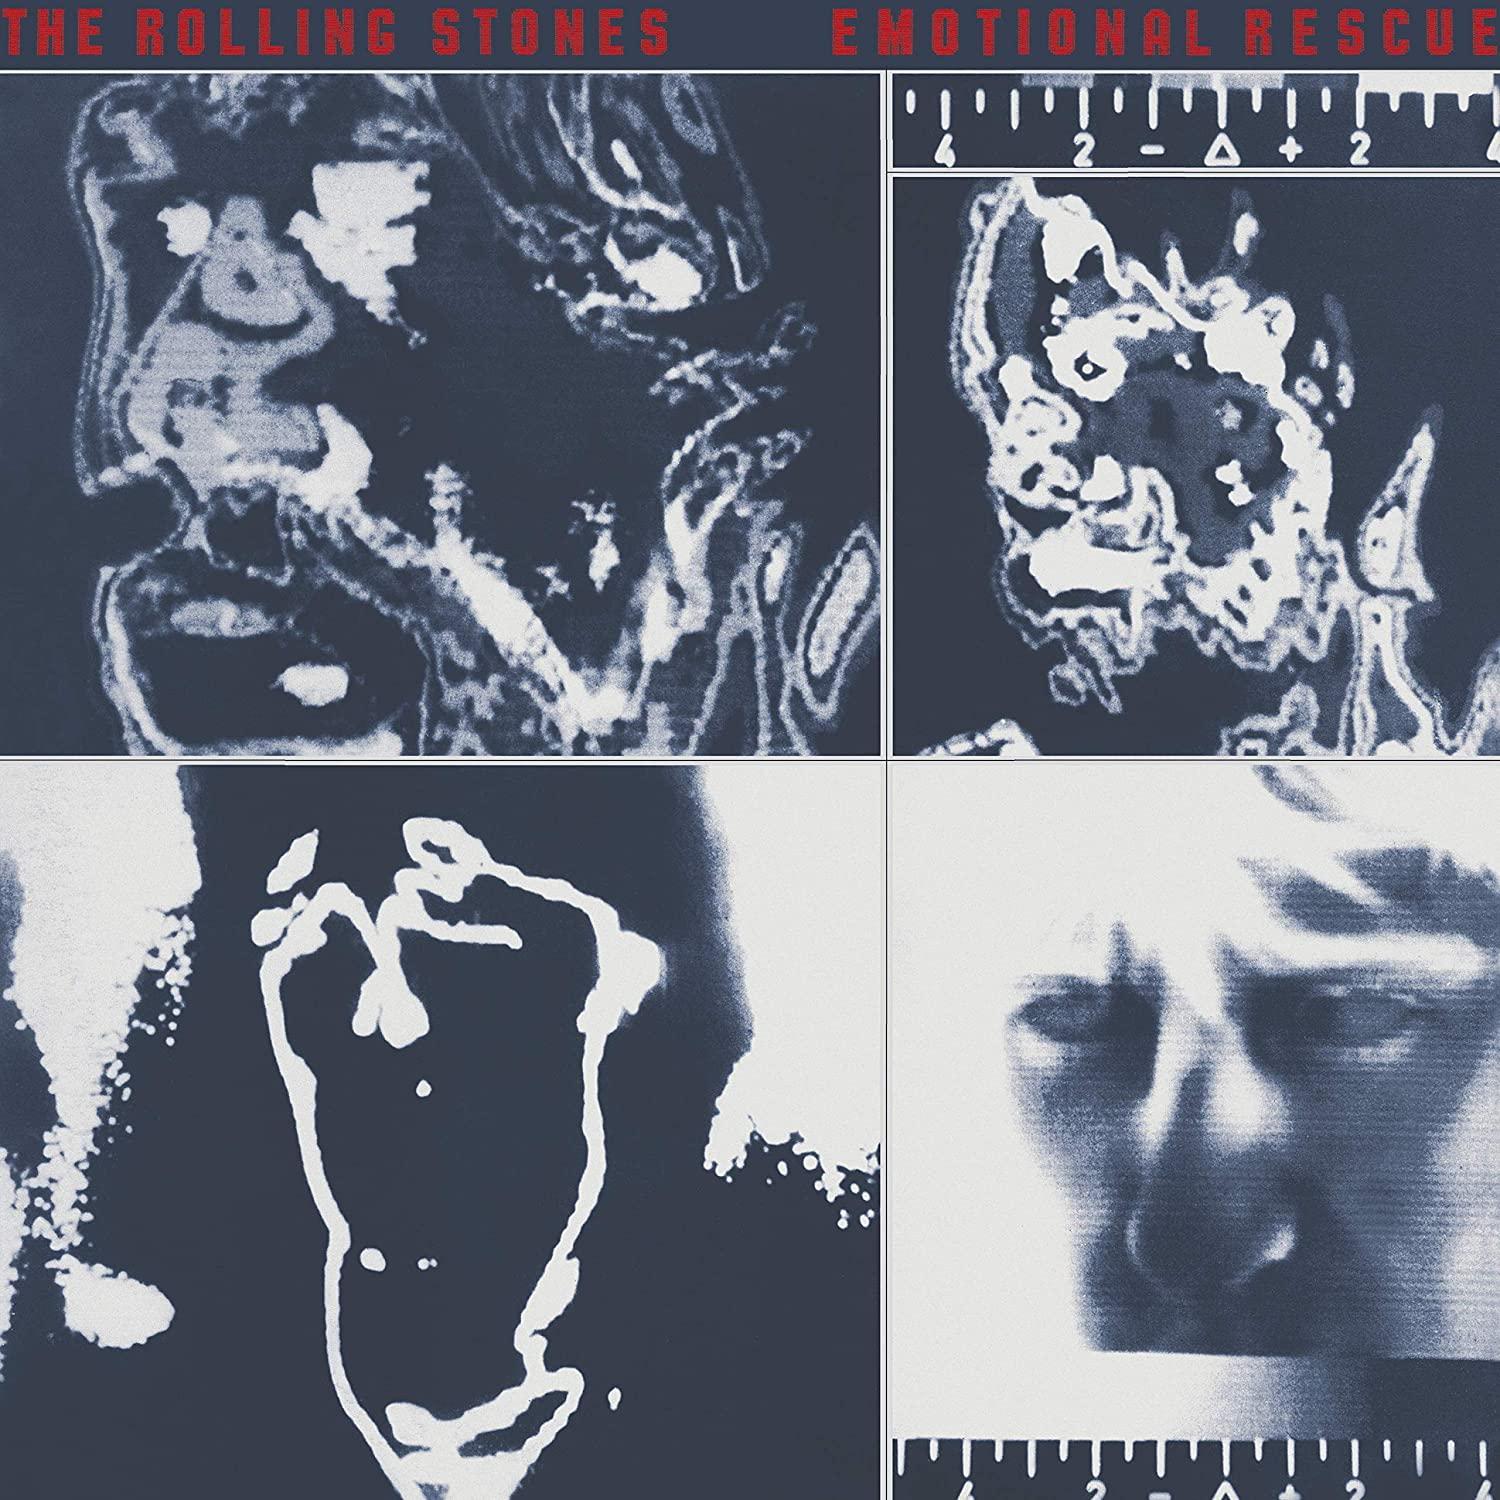 THE ROLLING STONES, Emotional Rescue